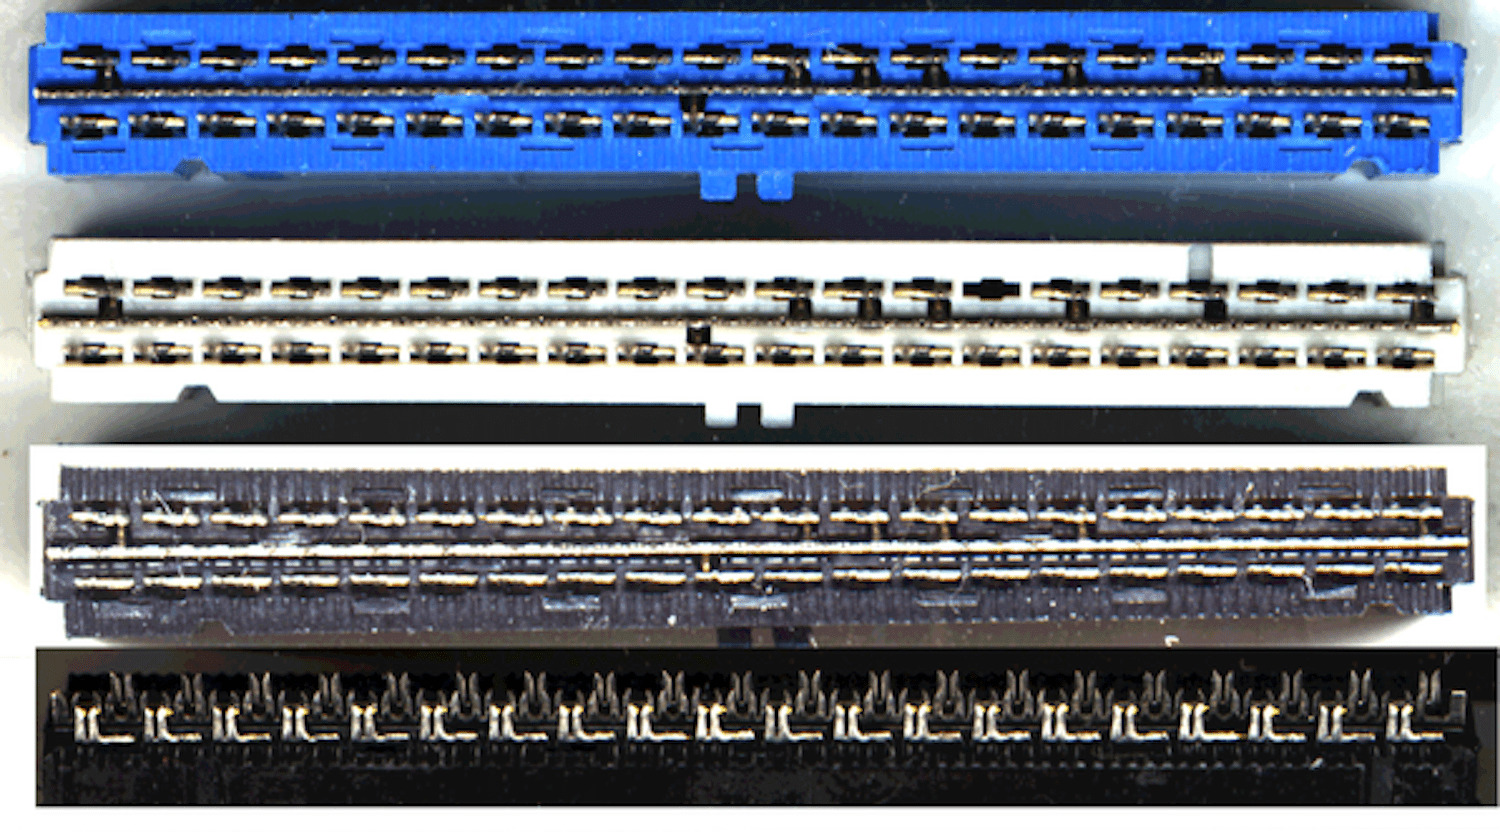 how-many-pins-are-on-a-pata-ide-motherboard-connector